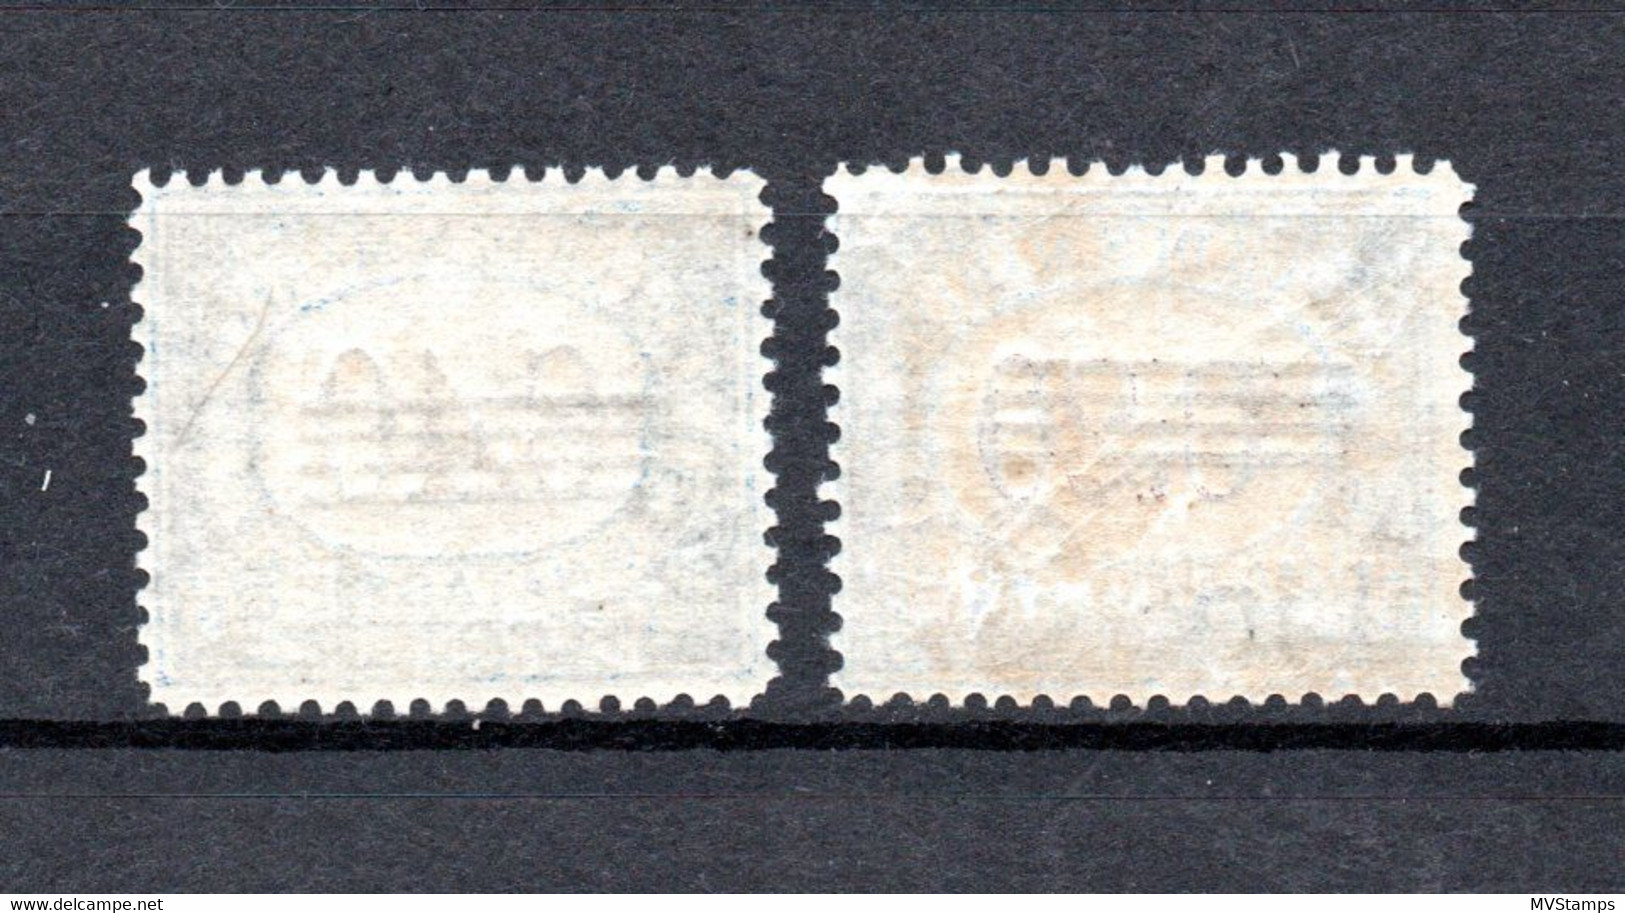 San Marino 1936 Old Overprinted Tax-stamps (Michel 59+63) Nice MNH - Postage Due